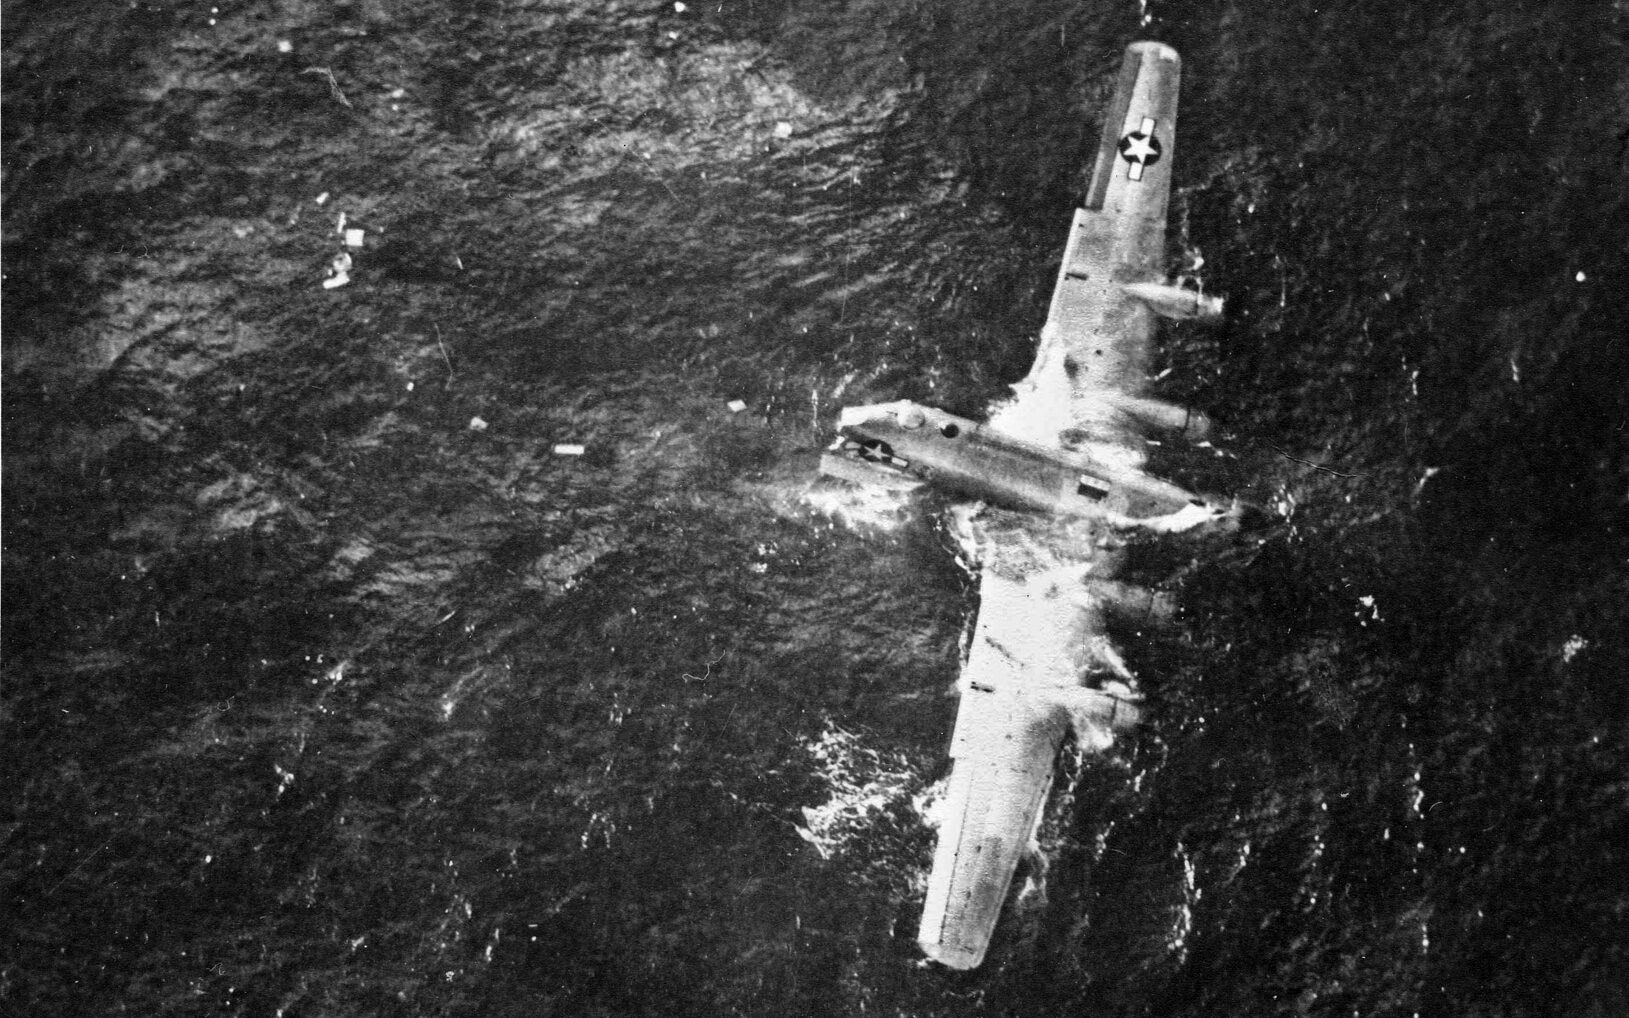 Not all the raiders escaped scot-free. Here half a B-29 that ditched in the sea remains afloat with a surviving crew member clinging to the No. 1 engine at top. 